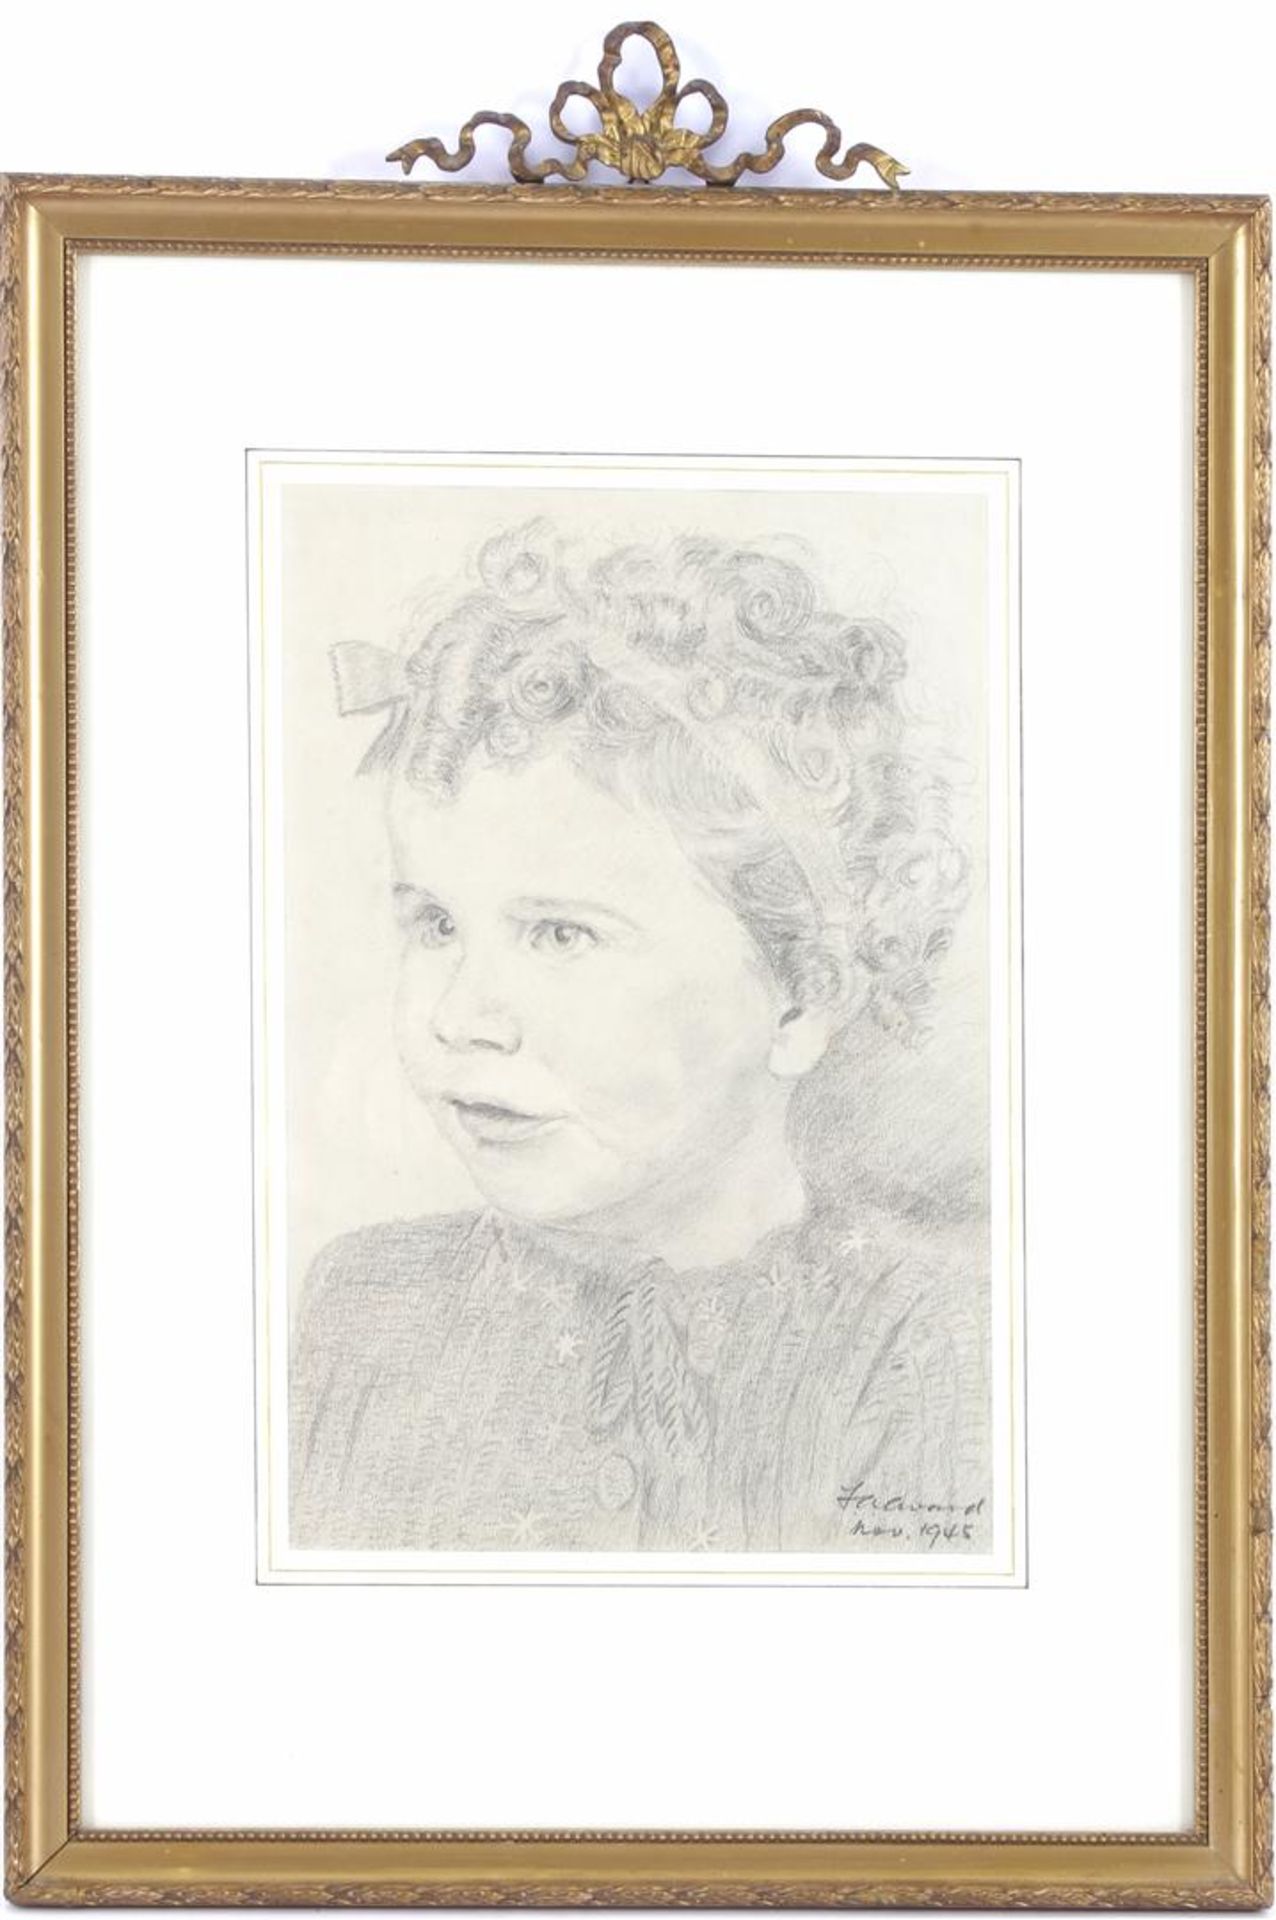 Unclear signed, portrait of a young girl, pencil drawing dated Nov. 1945, 30x20 cm in a classic